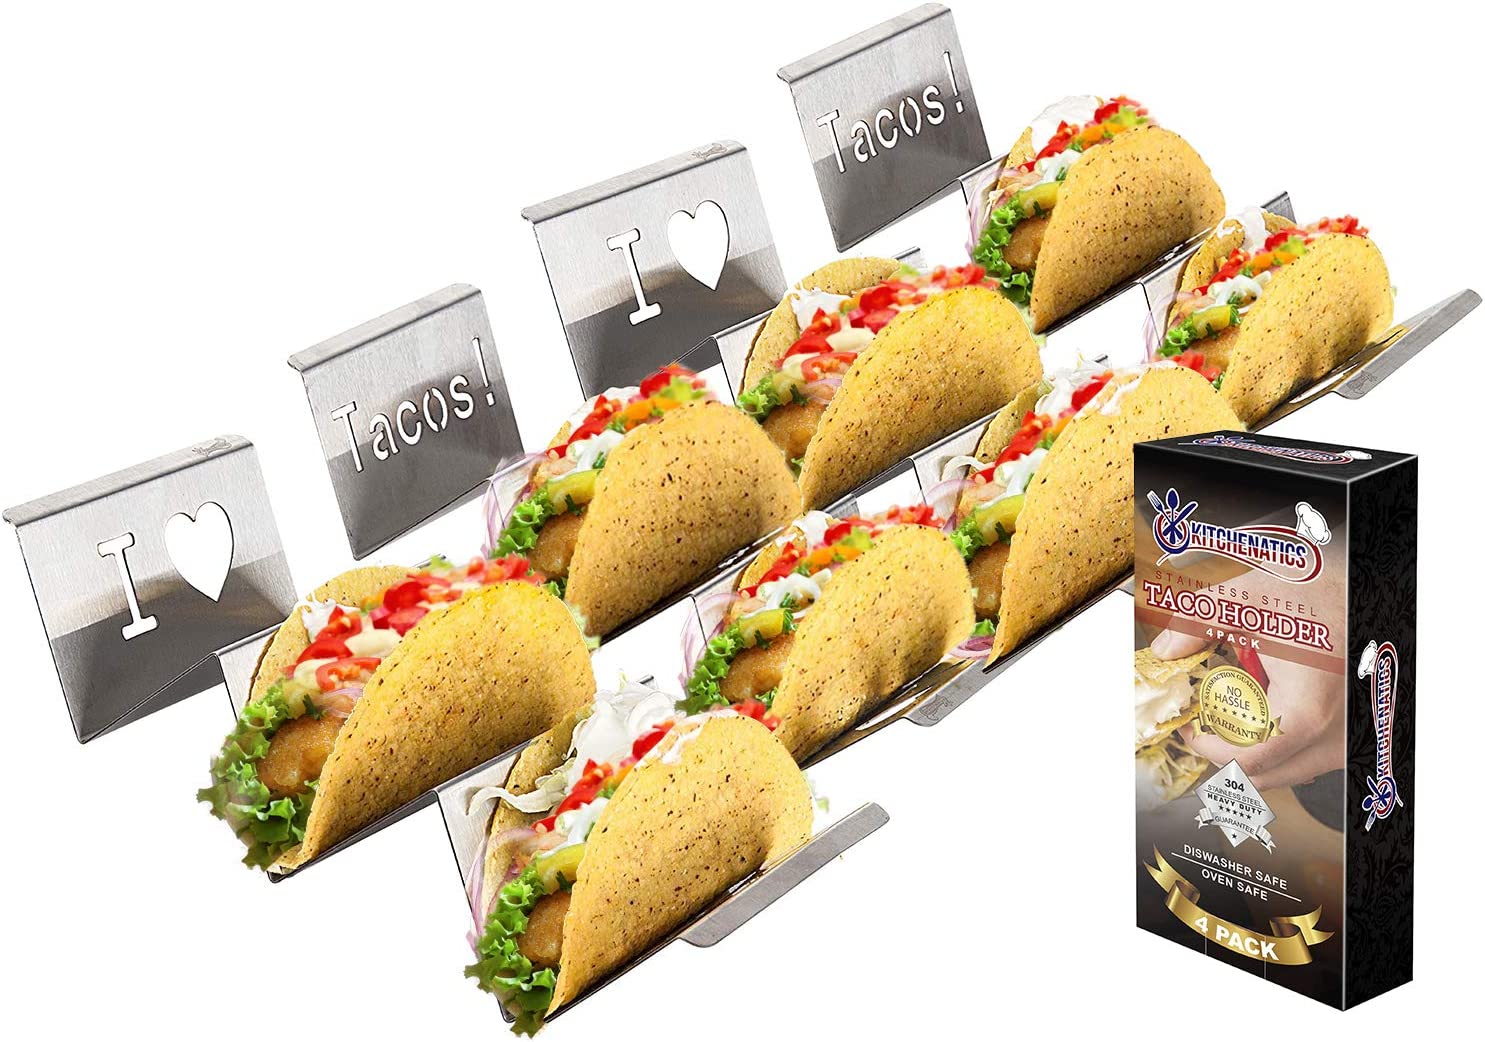 KITCHENATICS 4-Pack Stainless Steel Taco Holder Set- Wider & Stylish Taco rack that holds up to 3 Tacos Each for Soft & Hard Shell Tacos, Hotdogs - Rust Proof, Oven, Grill & Dishwasher Safe